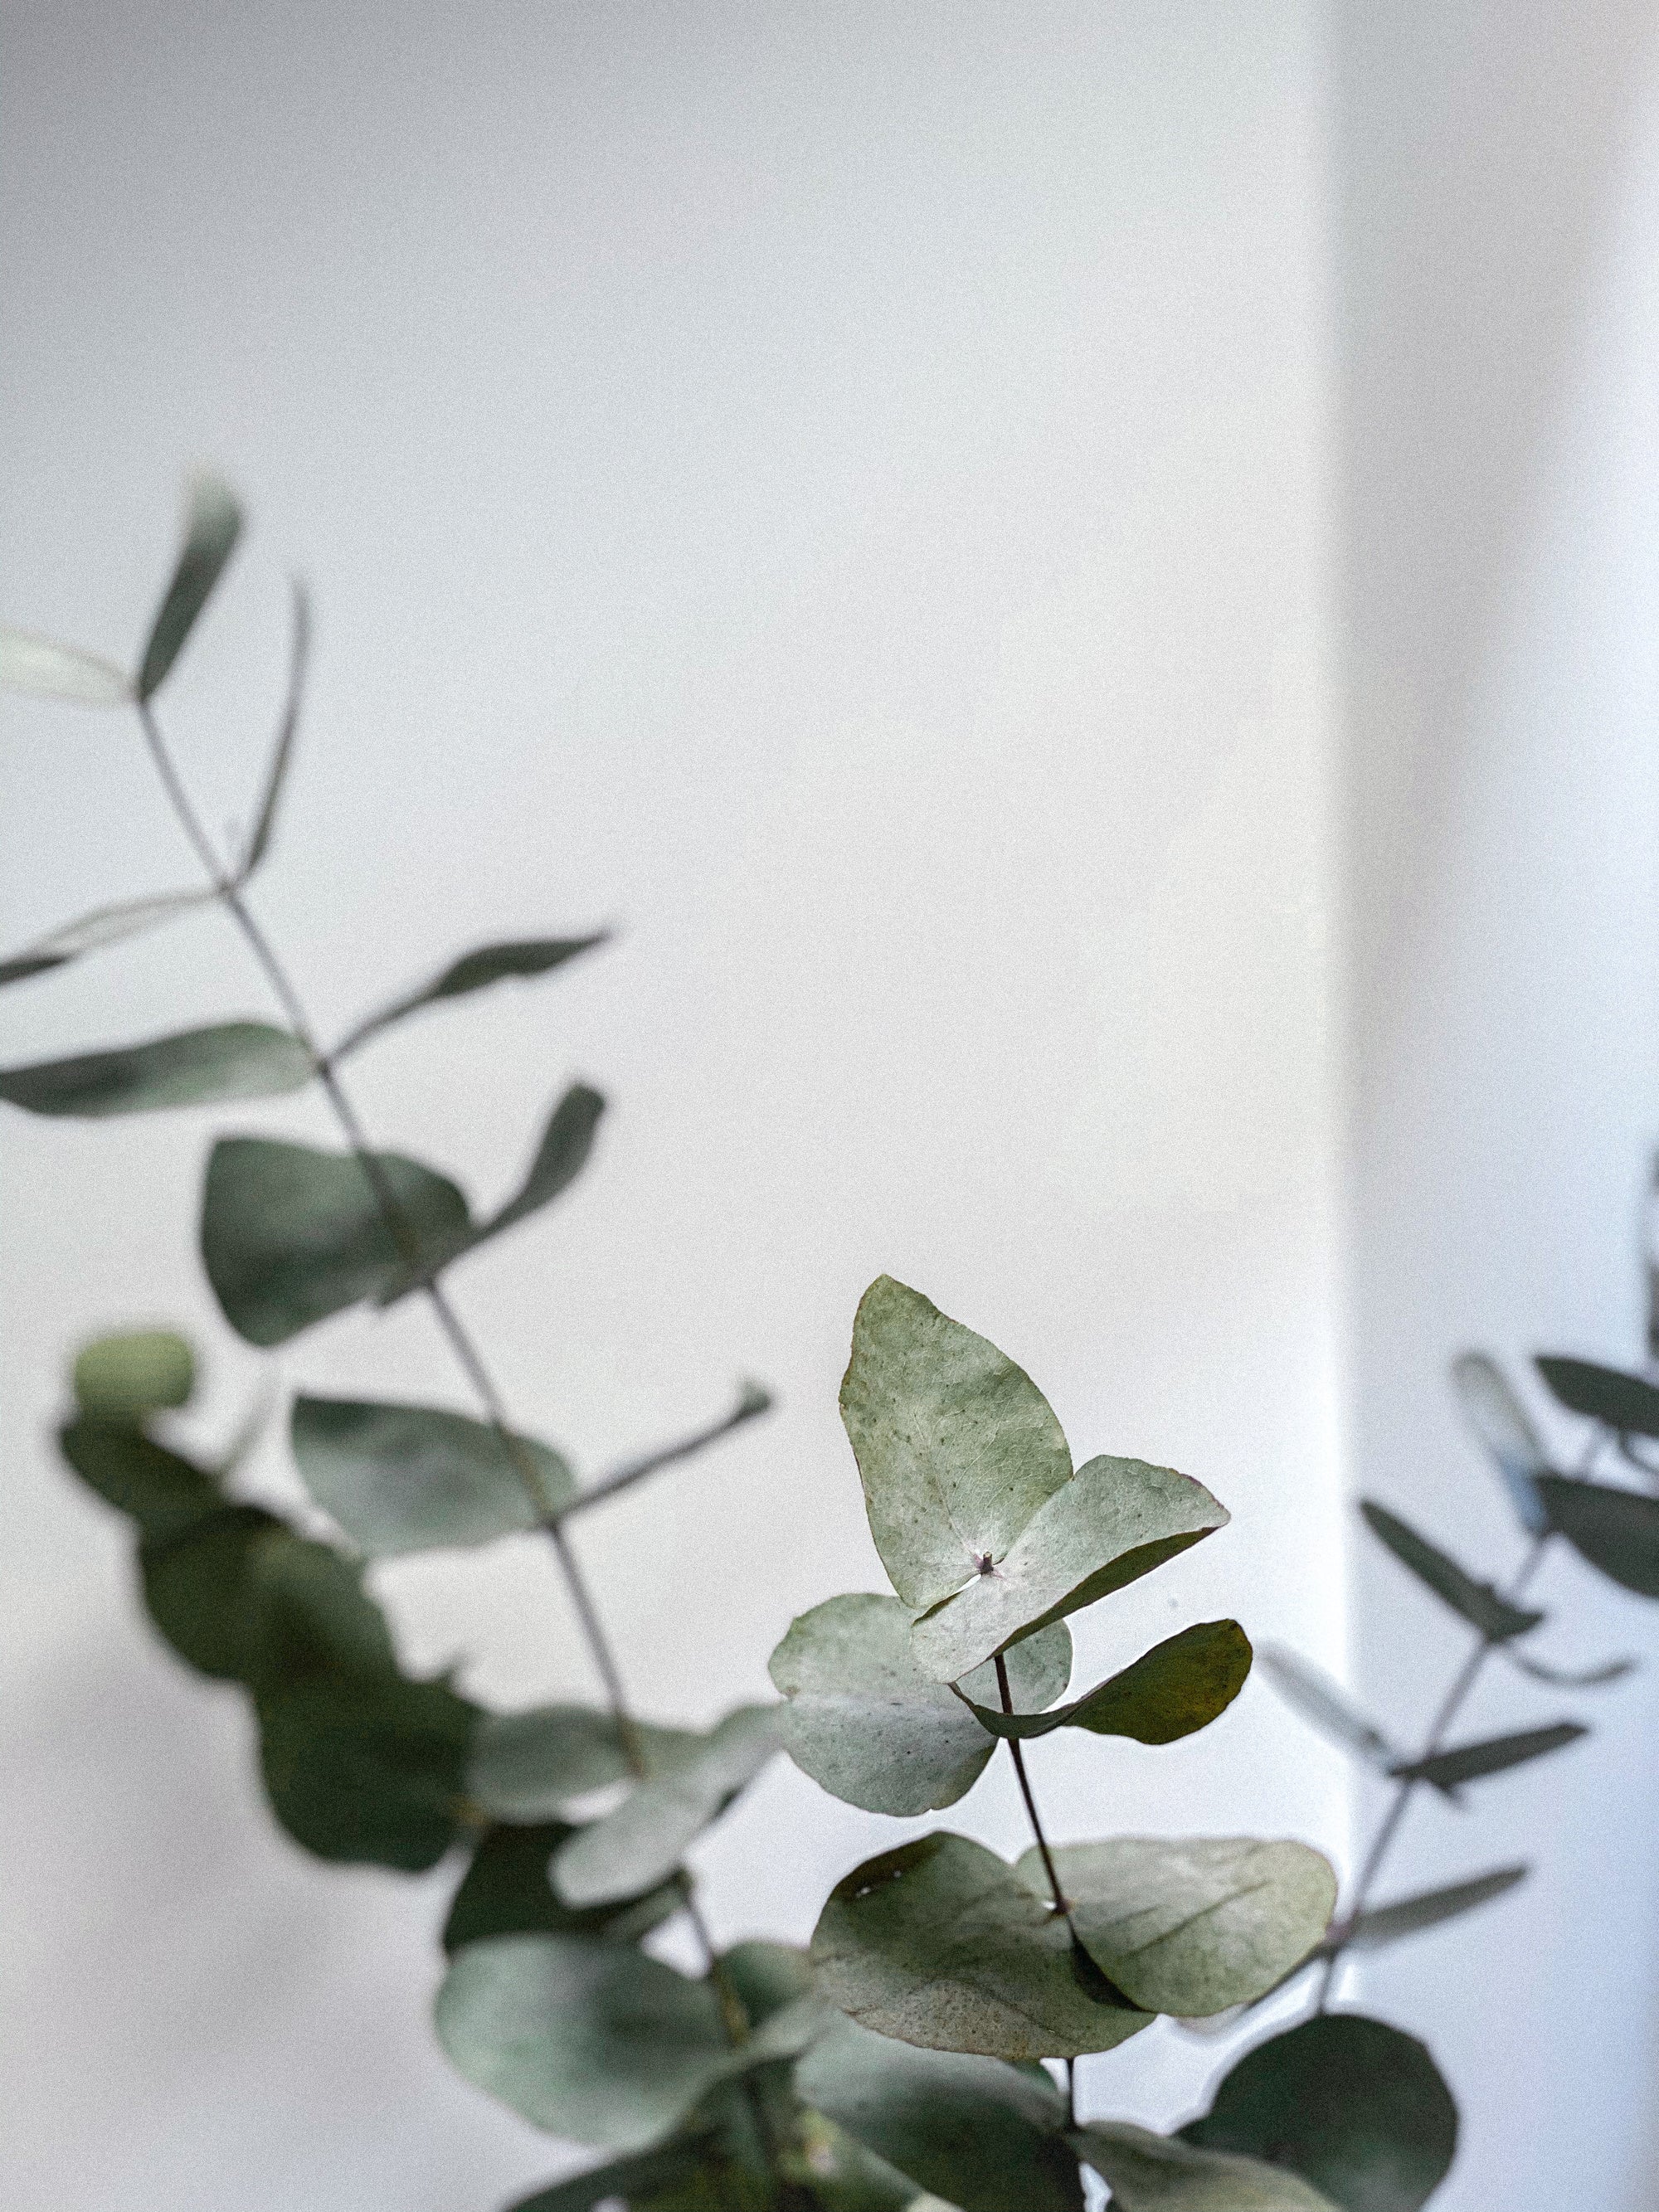 Why Hang Eucalyptus in the Shower?